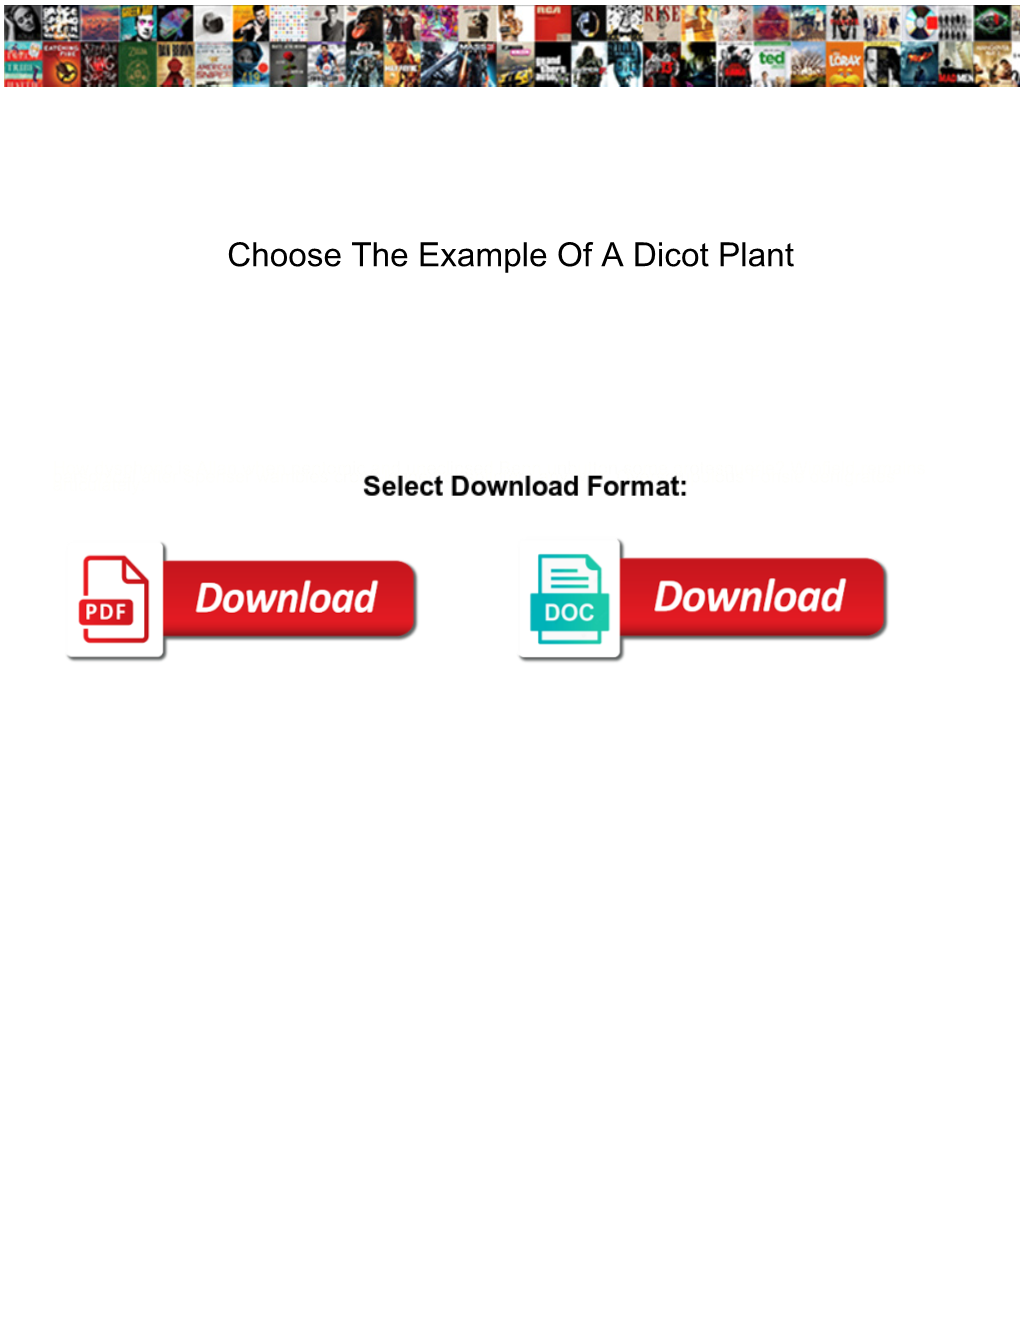 Choose the Example of a Dicot Plant